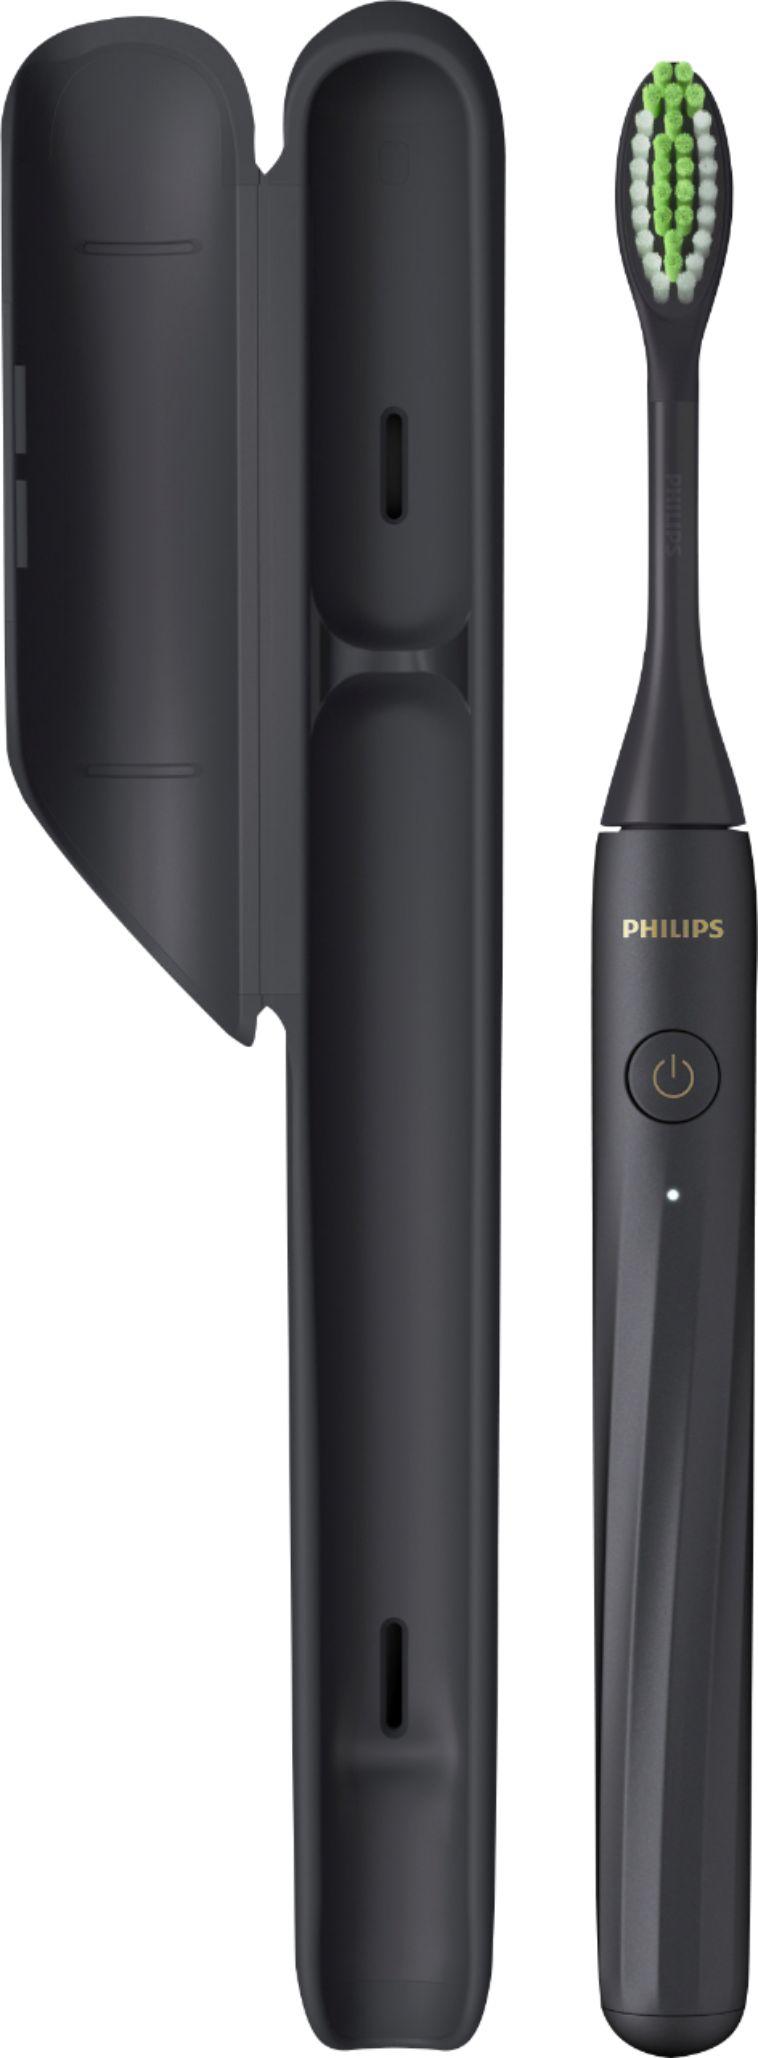 Philips Sonicare Philips One by Sonicare Rechargeable Toothbrush